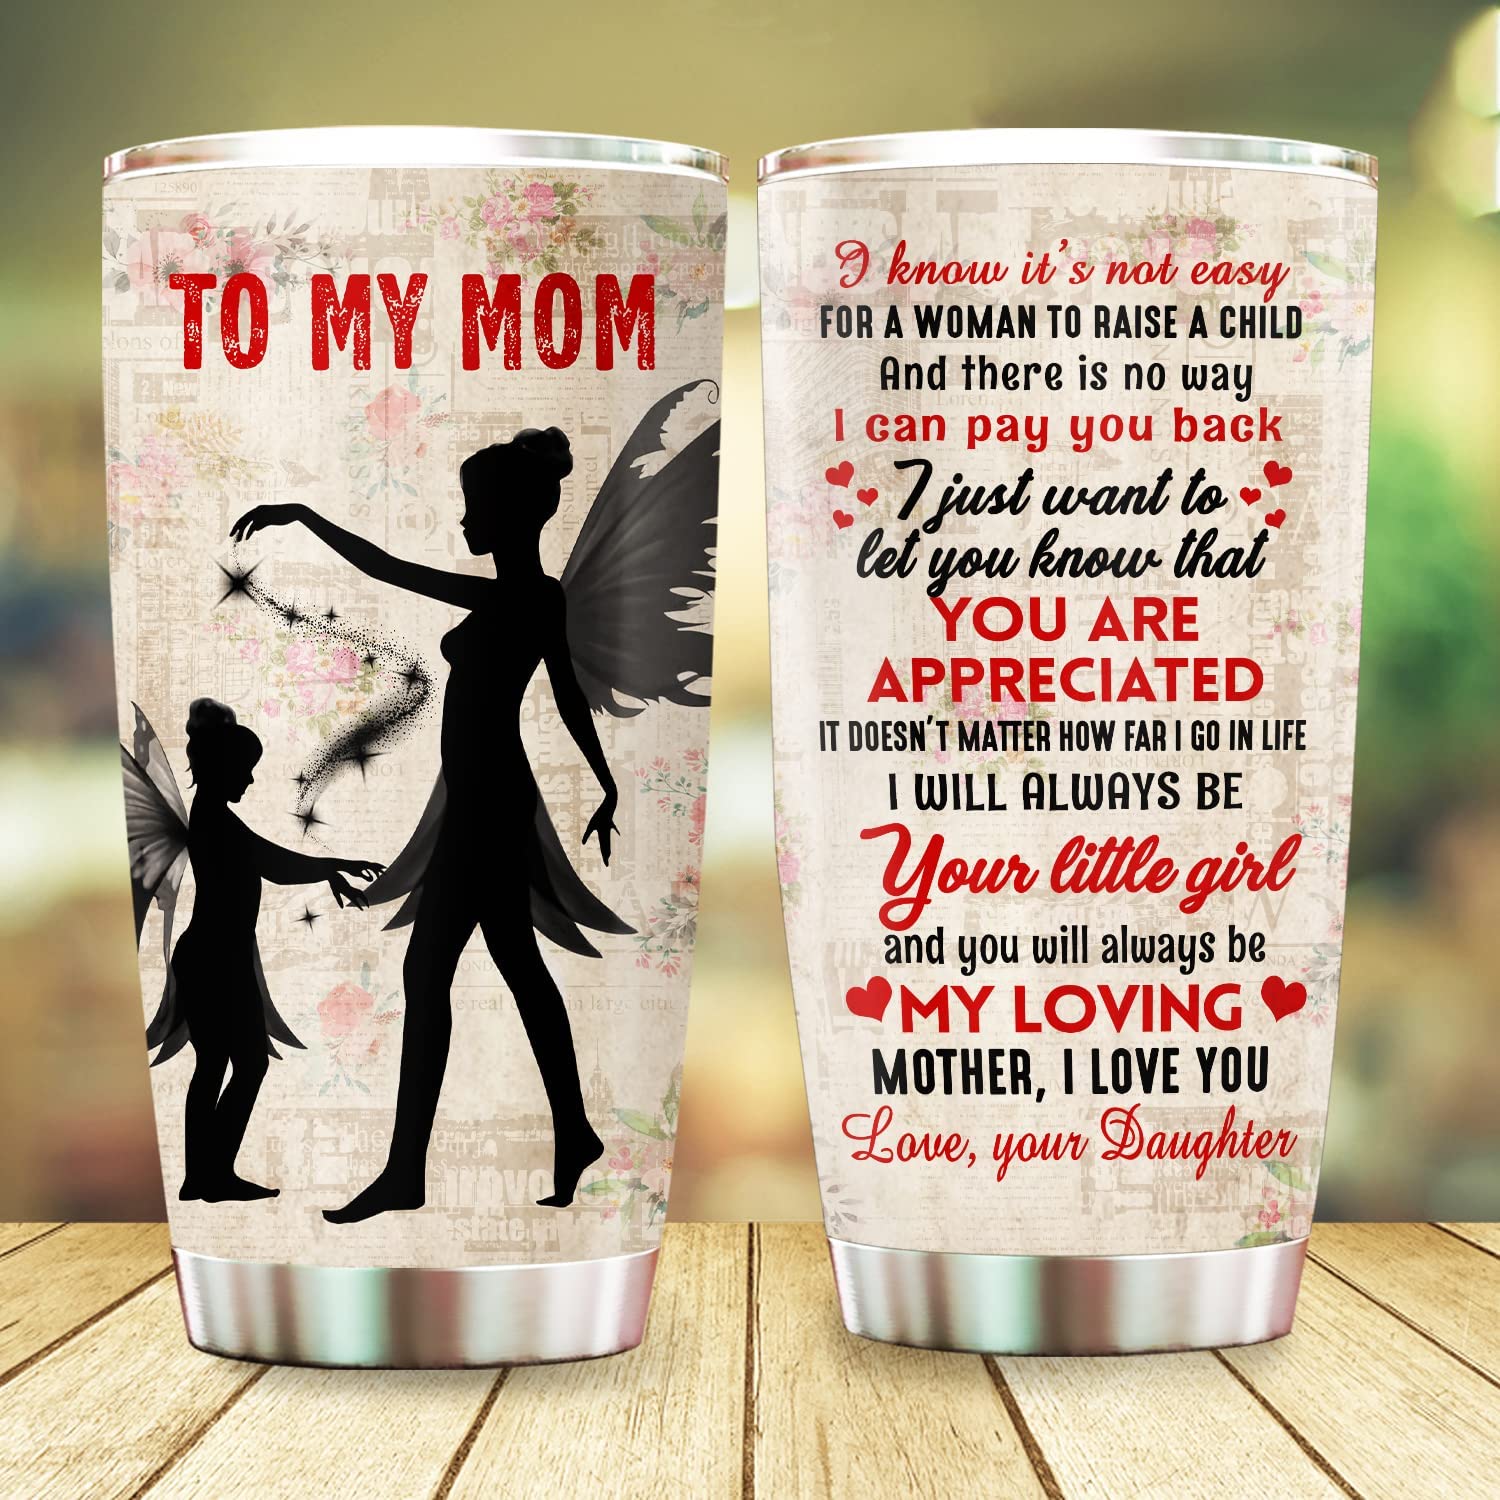 Mothers Day Gifts, To My Mom Tumbler, Mother Mama Mom Gift on Christmas Birthday, Birthday Gifts for Mom from Daughter 20oz Stainless Steel Tumbler Cup with Lid Cold & Hot Water Coffee